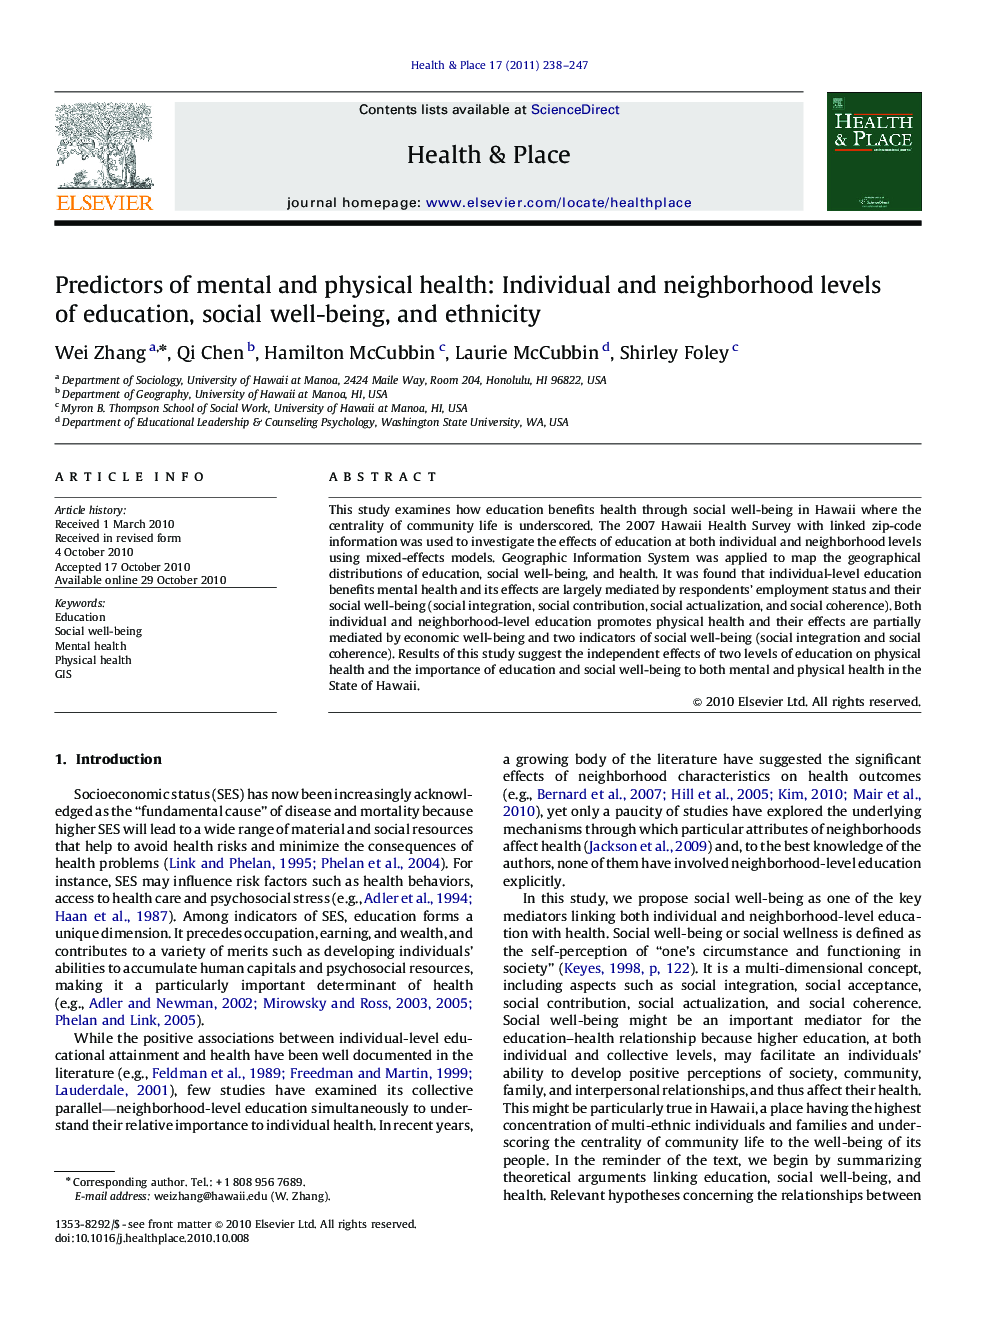 Predictors of mental and physical health: Individual and neighborhood levels of education, social well-being, and ethnicity